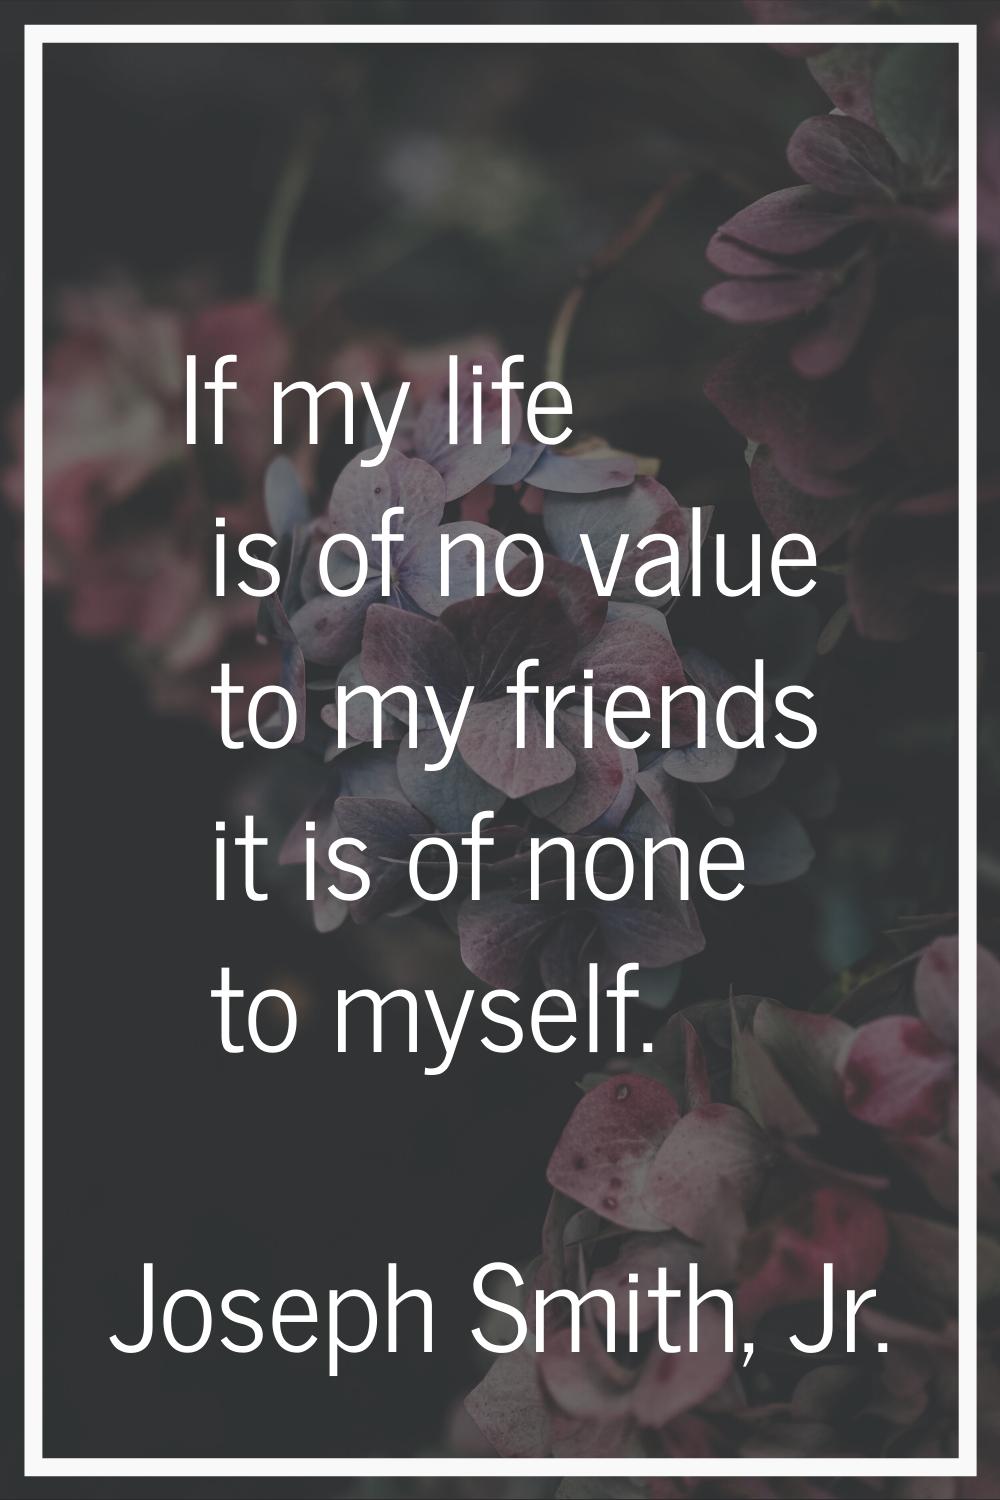 If my life is of no value to my friends it is of none to myself.